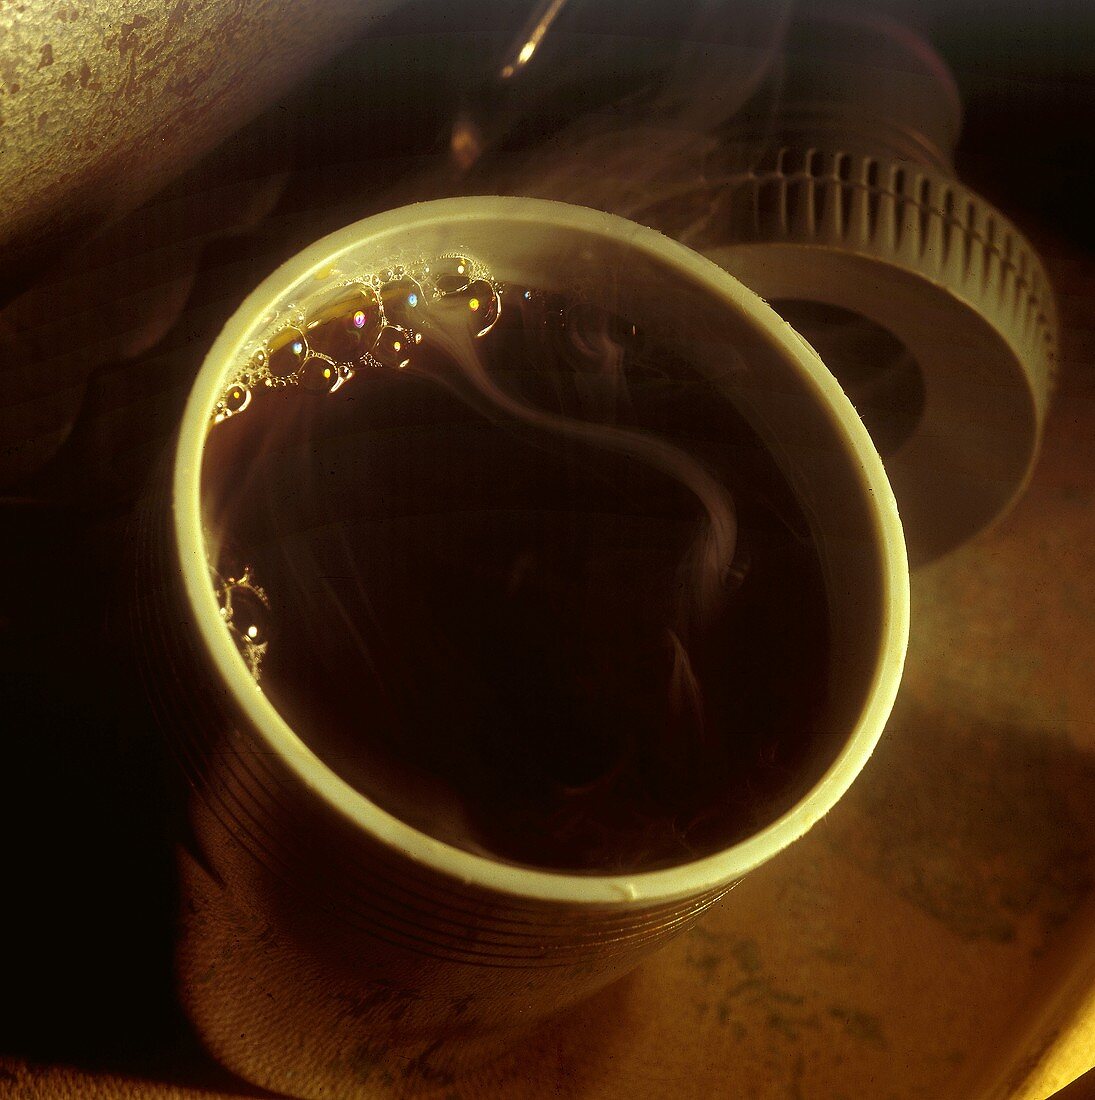 A Steaming Cup of Coffee